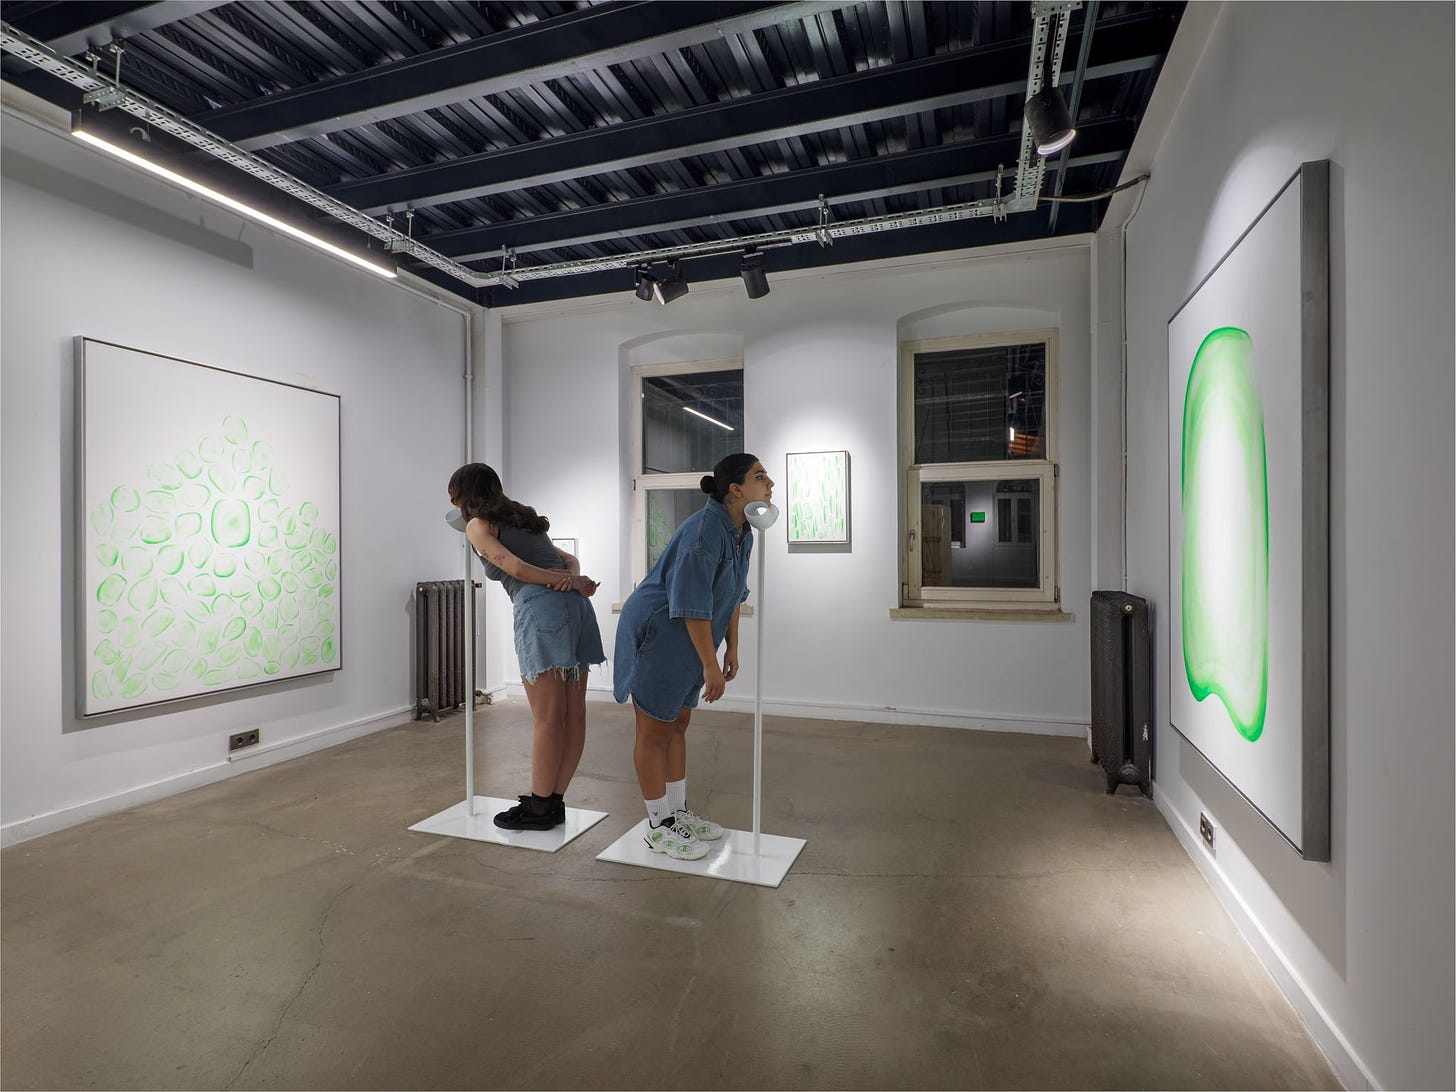 Two people stand and lean into thin white sticks which have chin cups. They appear to view green and white abstract art on the walls of a contemporary art gallery.